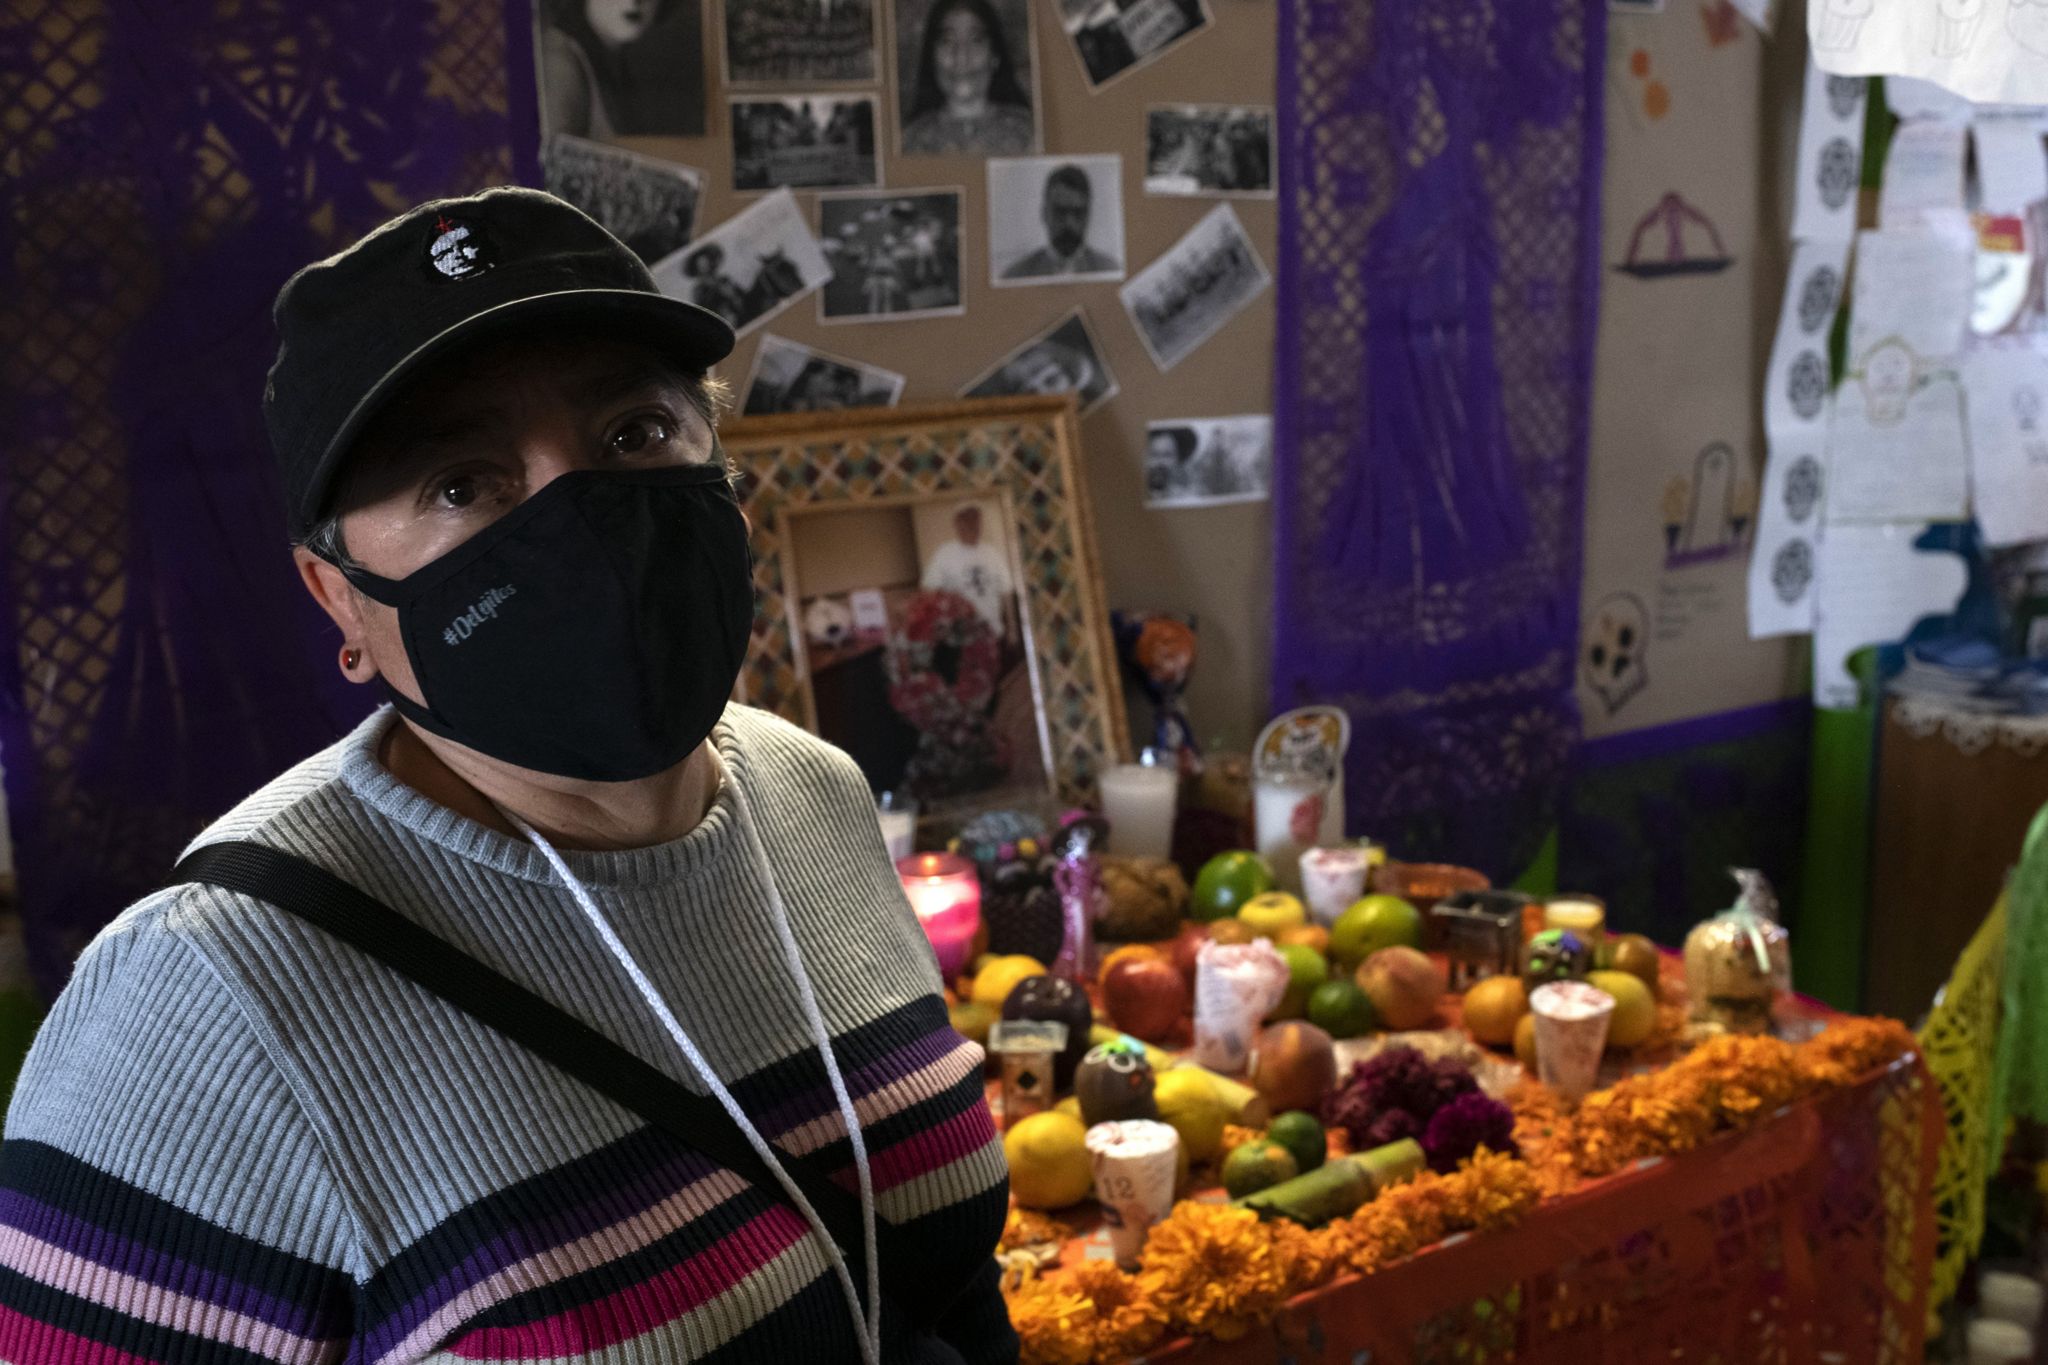 Elvira Madrid Romero in front of the offering for Jaime Alberto Montejo, who founded the organisation Brigada Callejera, which supports female sex workers